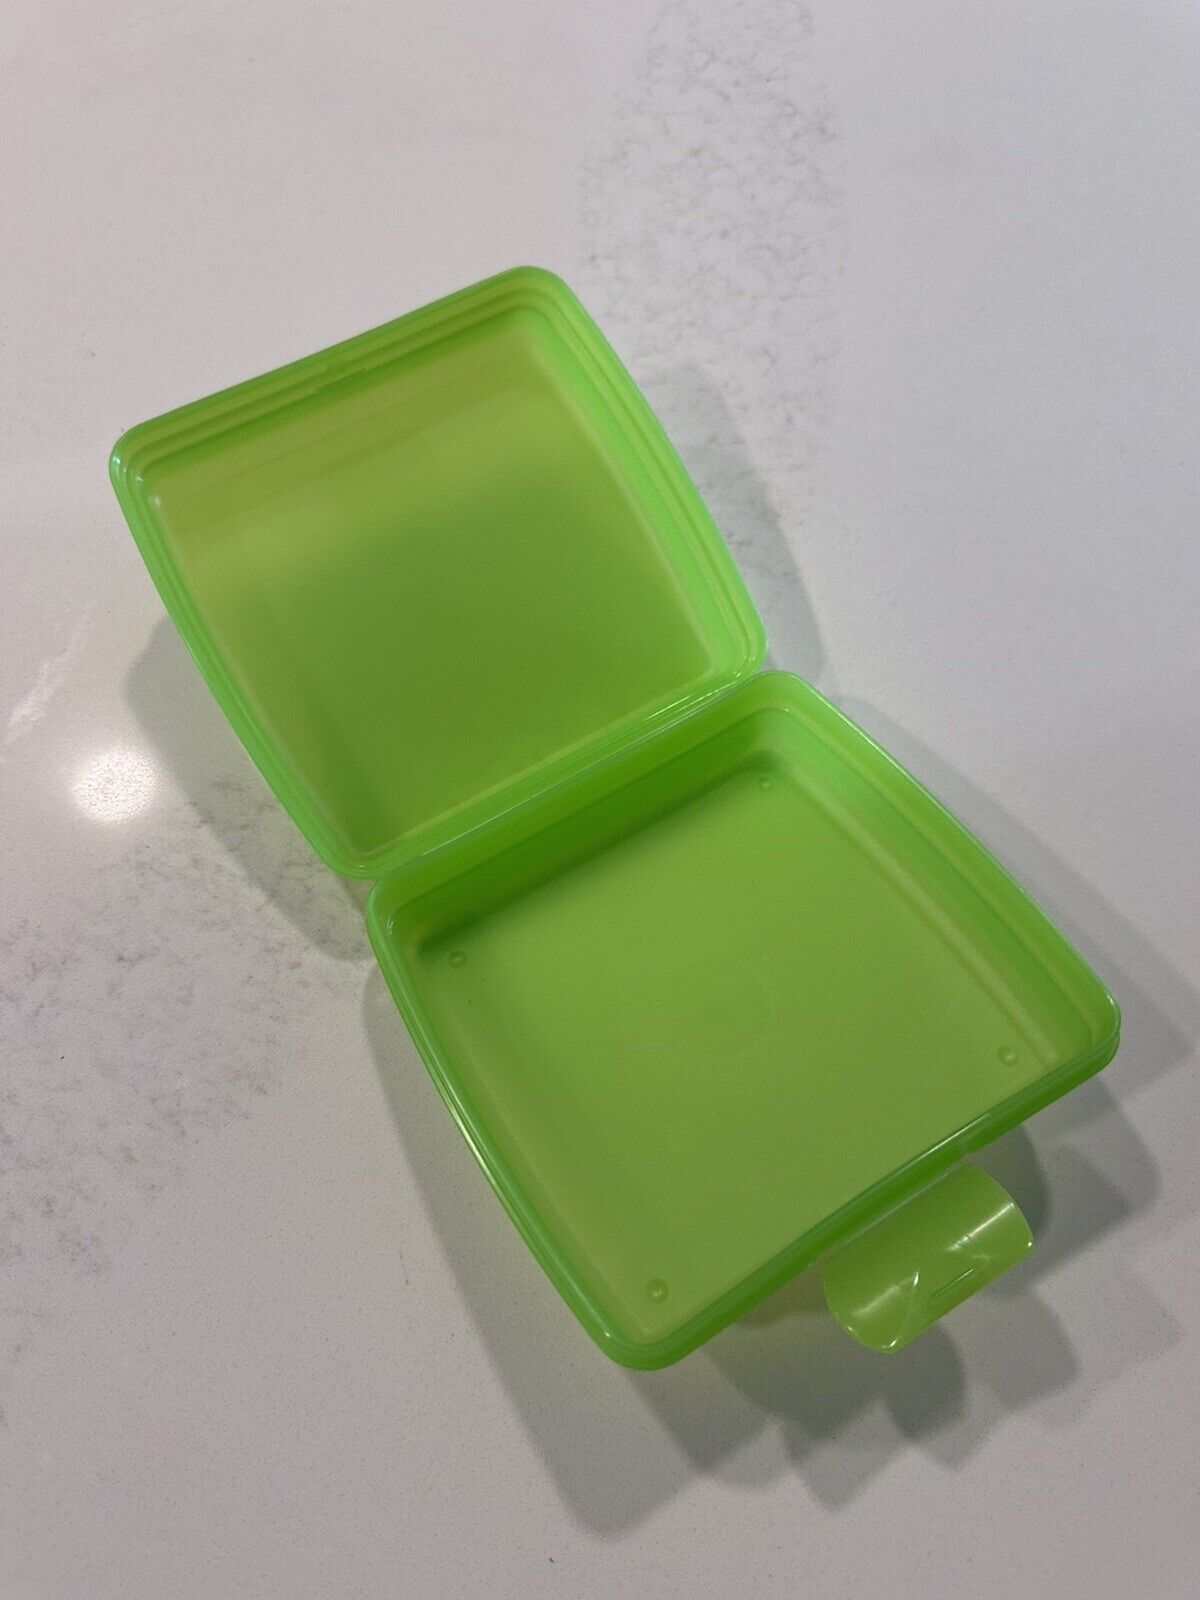 Tupperware Sandwich Keeper Hot Lime Green Container Square Locking Hinge Used 2x